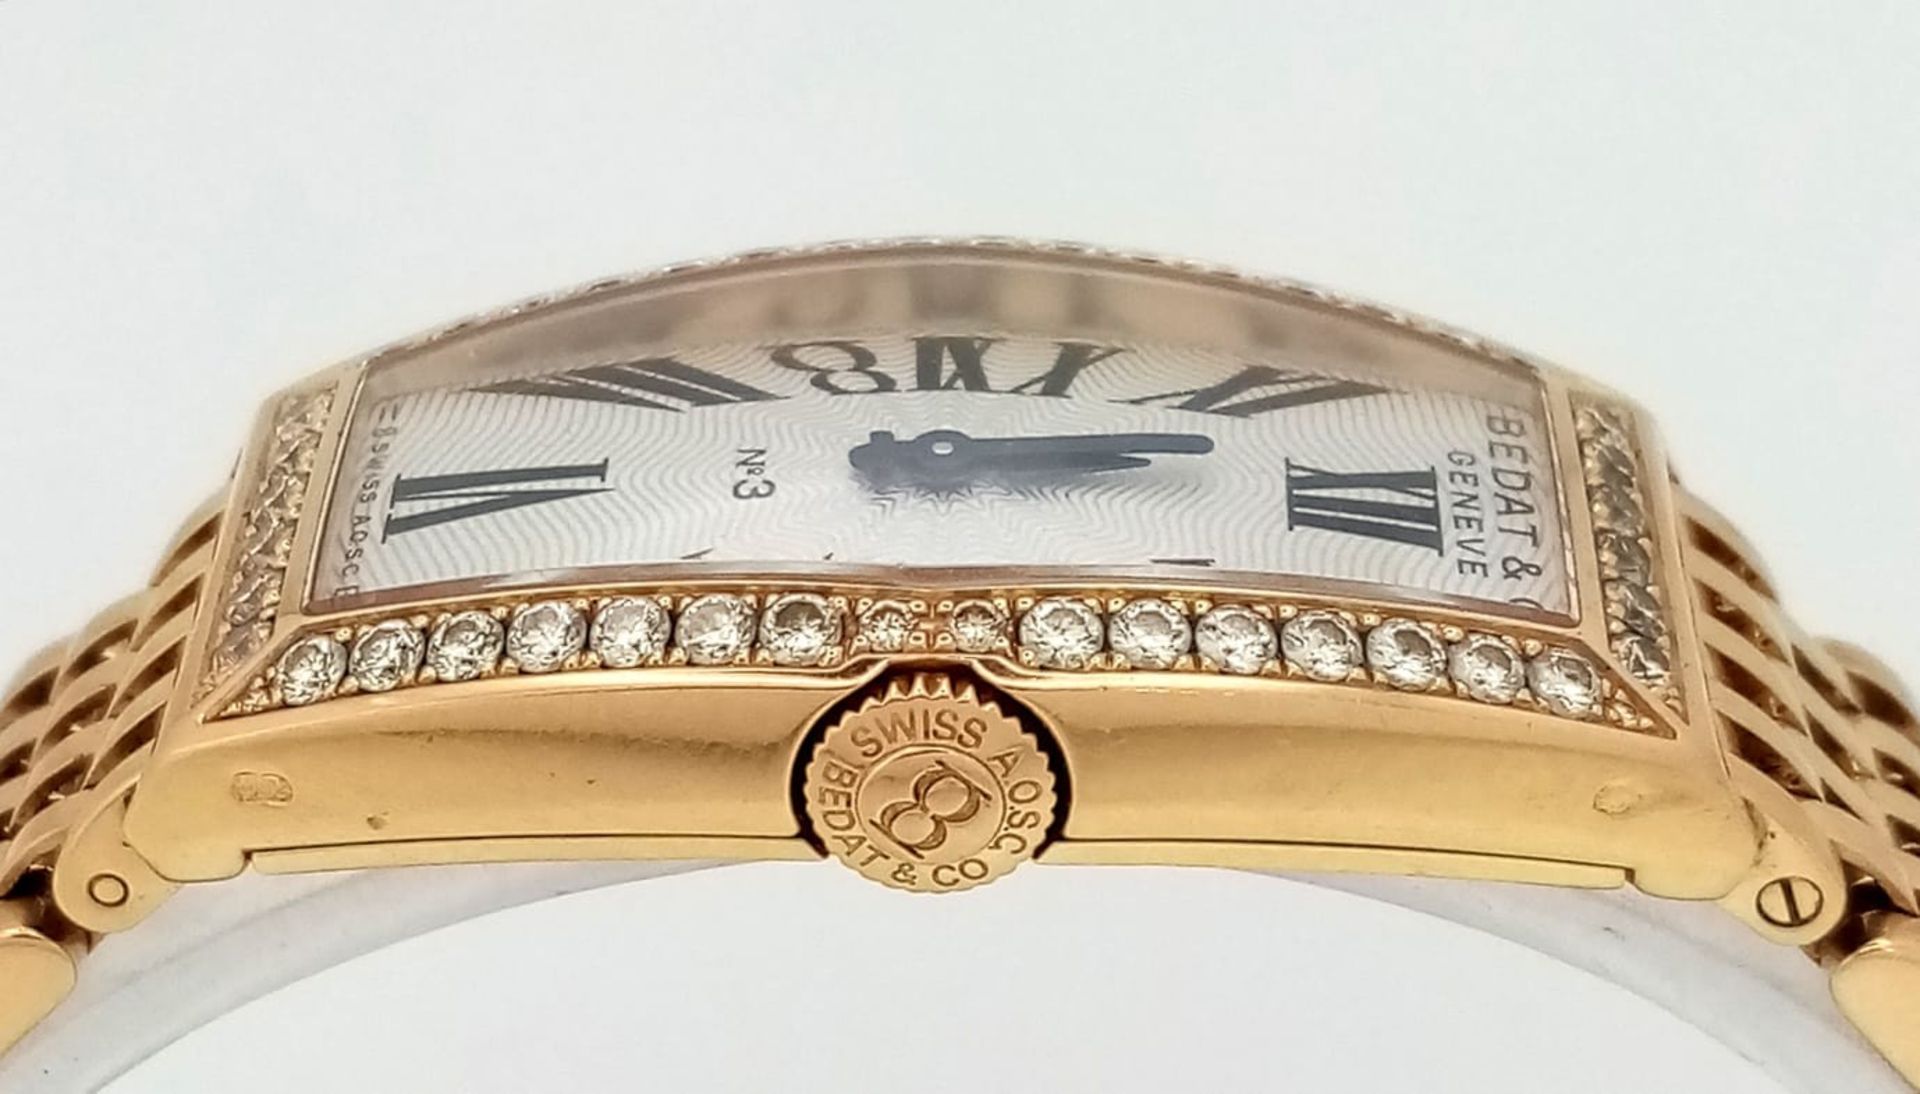 A BEDAT AND CO 18K GOLD LADIES WRIST WATCH WITH DIAMOND BEZEL AND SOLID 18K GOLD STRAP, UNIQUE - Image 3 of 7